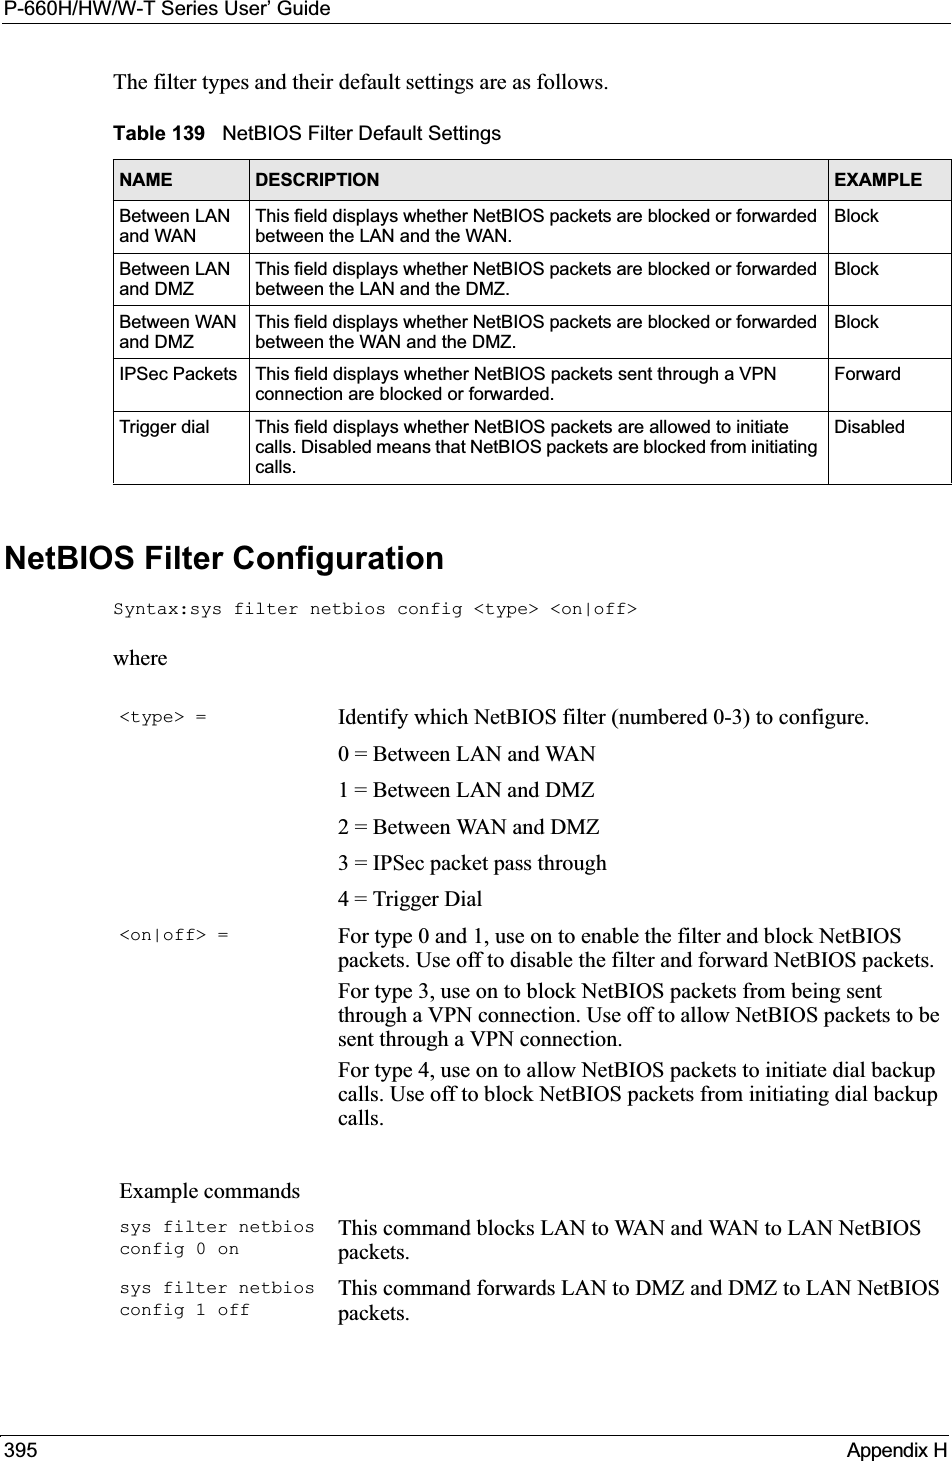 P-660H/HW/W-T Series User’ Guide395 Appendix HThe filter types and their default settings are as follows.NetBIOS Filter ConfigurationSyntax:sys filter netbios config &lt;type&gt; &lt;on|off&gt;whereTable 139   NetBIOS Filter Default SettingsNAME DESCRIPTION EXAMPLEBetween LAN and WANThis field displays whether NetBIOS packets are blocked or forwarded between the LAN and the WAN.BlockBetween LAN and DMZThis field displays whether NetBIOS packets are blocked or forwarded between the LAN and the DMZ.BlockBetween WAN and DMZThis field displays whether NetBIOS packets are blocked or forwarded between the WAN and the DMZ.BlockIPSec Packets This field displays whether NetBIOS packets sent through a VPN connection are blocked or forwarded. ForwardTrigger dial This field displays whether NetBIOS packets are allowed to initiate calls. Disabled means that NetBIOS packets are blocked from initiating calls.Disabled&lt;type&gt; = Identify which NetBIOS filter (numbered 0-3) to configure.0 = Between LAN and WAN1 = Between LAN and DMZ2 = Between WAN and DMZ3 = IPSec packet pass through4 = Trigger Dial&lt;on|off&gt; = For type 0 and 1, use on to enable the filter and block NetBIOS packets. Use off to disable the filter and forward NetBIOS packets.For type 3, use on to block NetBIOS packets from being sent through a VPN connection. Use off to allow NetBIOS packets to be sent through a VPN connection.For type 4, use on to allow NetBIOS packets to initiate dial backup calls. Use off to block NetBIOS packets from initiating dial backup calls.Example commandssys filter netbios config 0 onThis command blocks LAN to WAN and WAN to LAN NetBIOS packets.sys filter netbios config 1 offThis command forwards LAN to DMZ and DMZ to LAN NetBIOS packets.